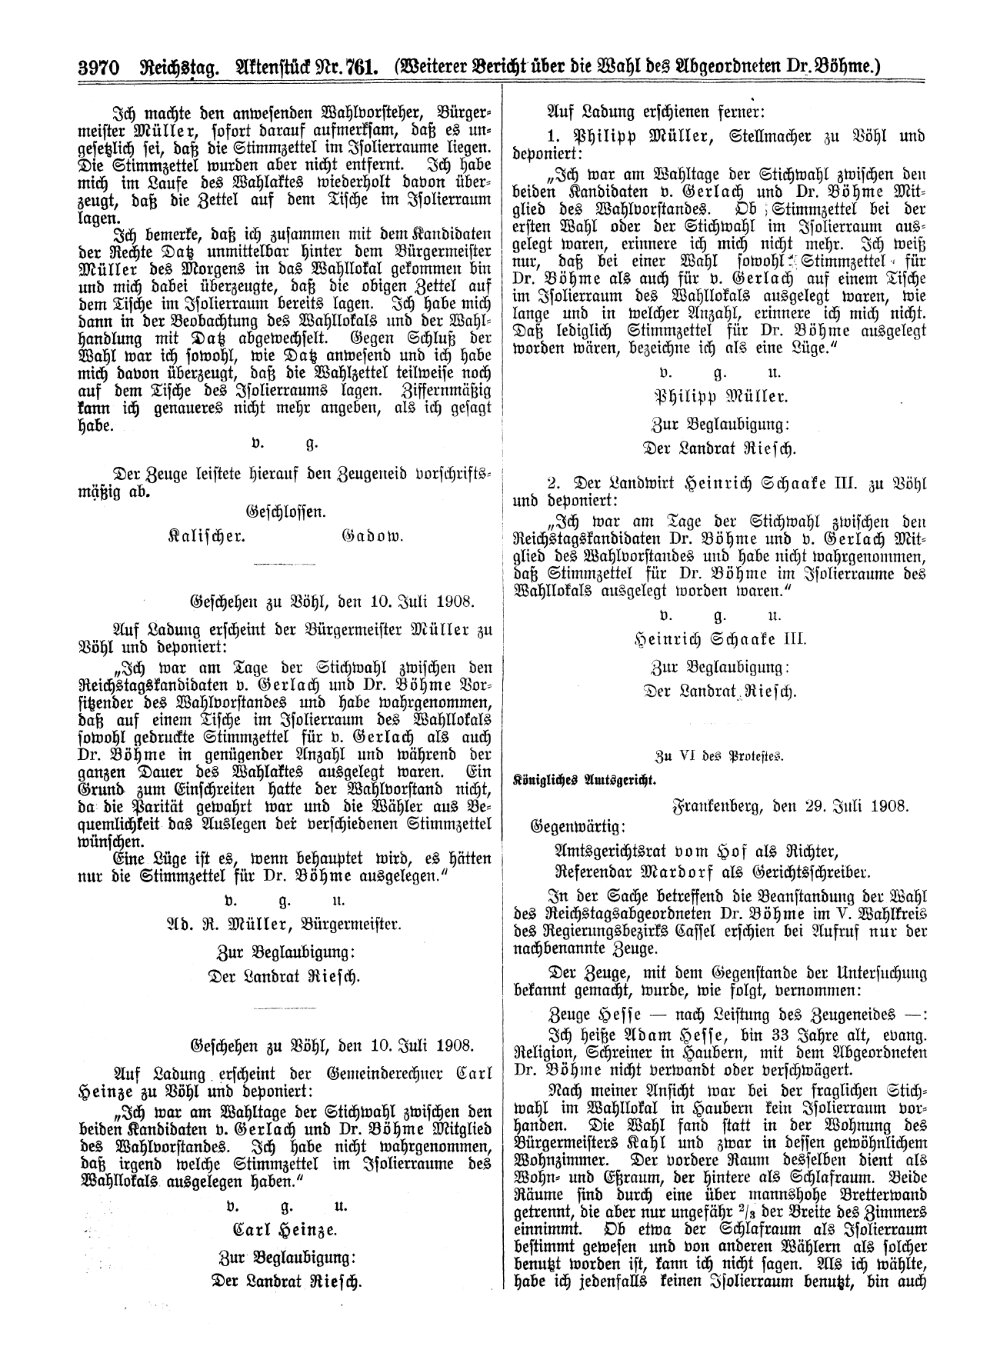 Scan of page 3970